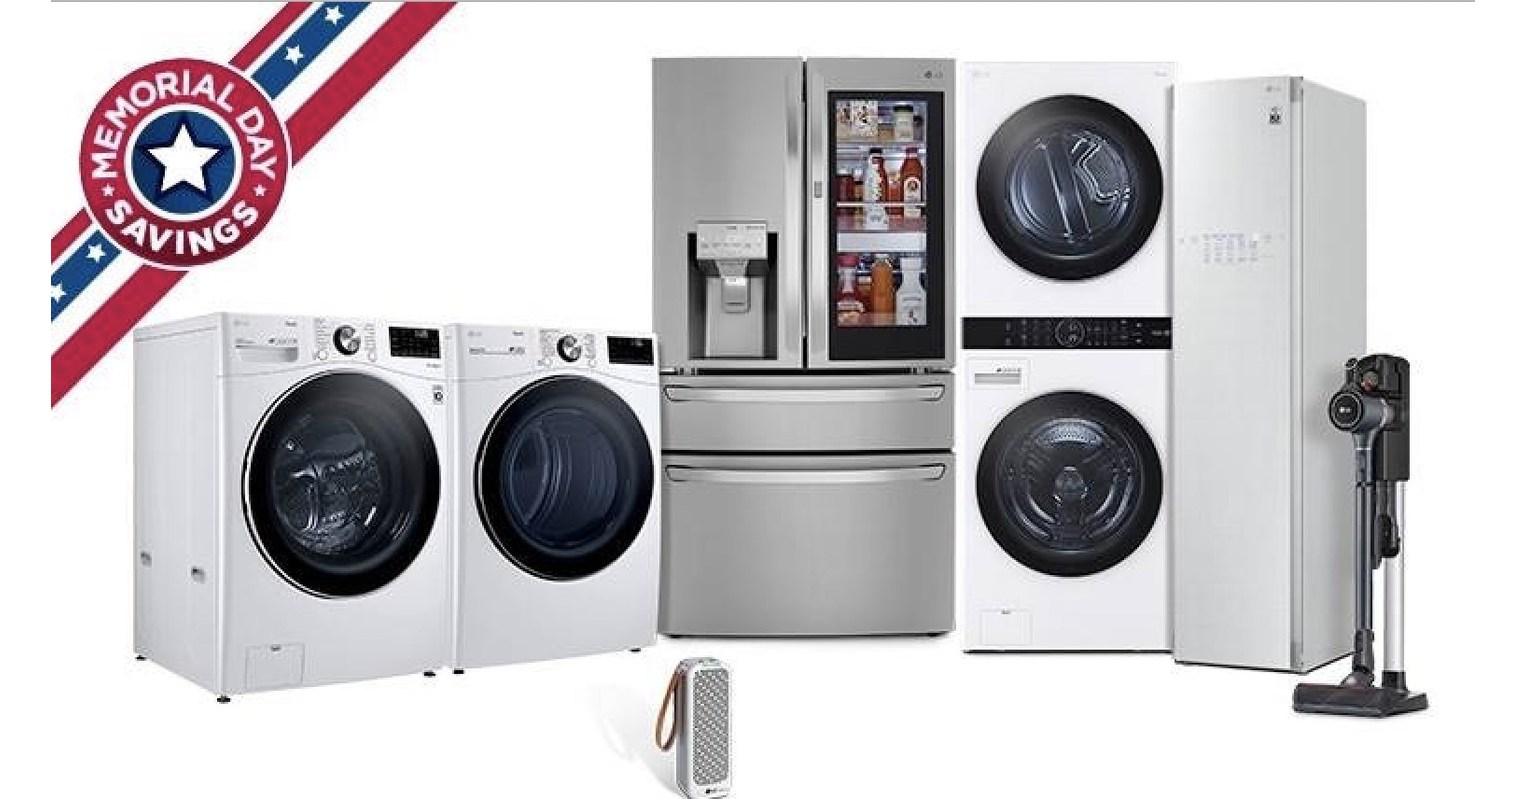 CELEBRATE SUMMER WITH MAJOR MEMORIAL DAY SAVINGS ON LG HOME APPLIANCES